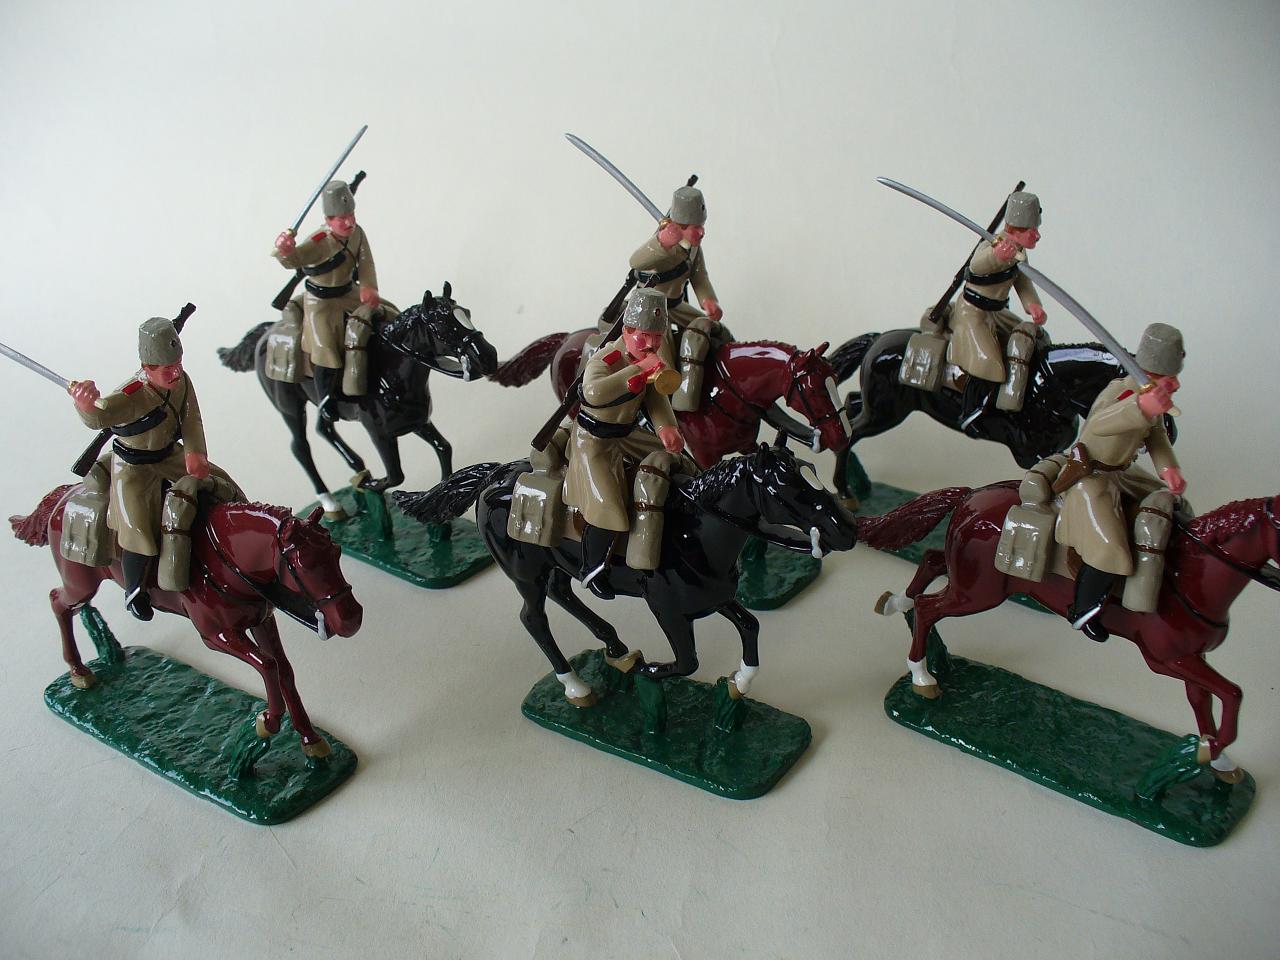 Russian Cossacks | Regal toy soldiers Blog1280 x 960